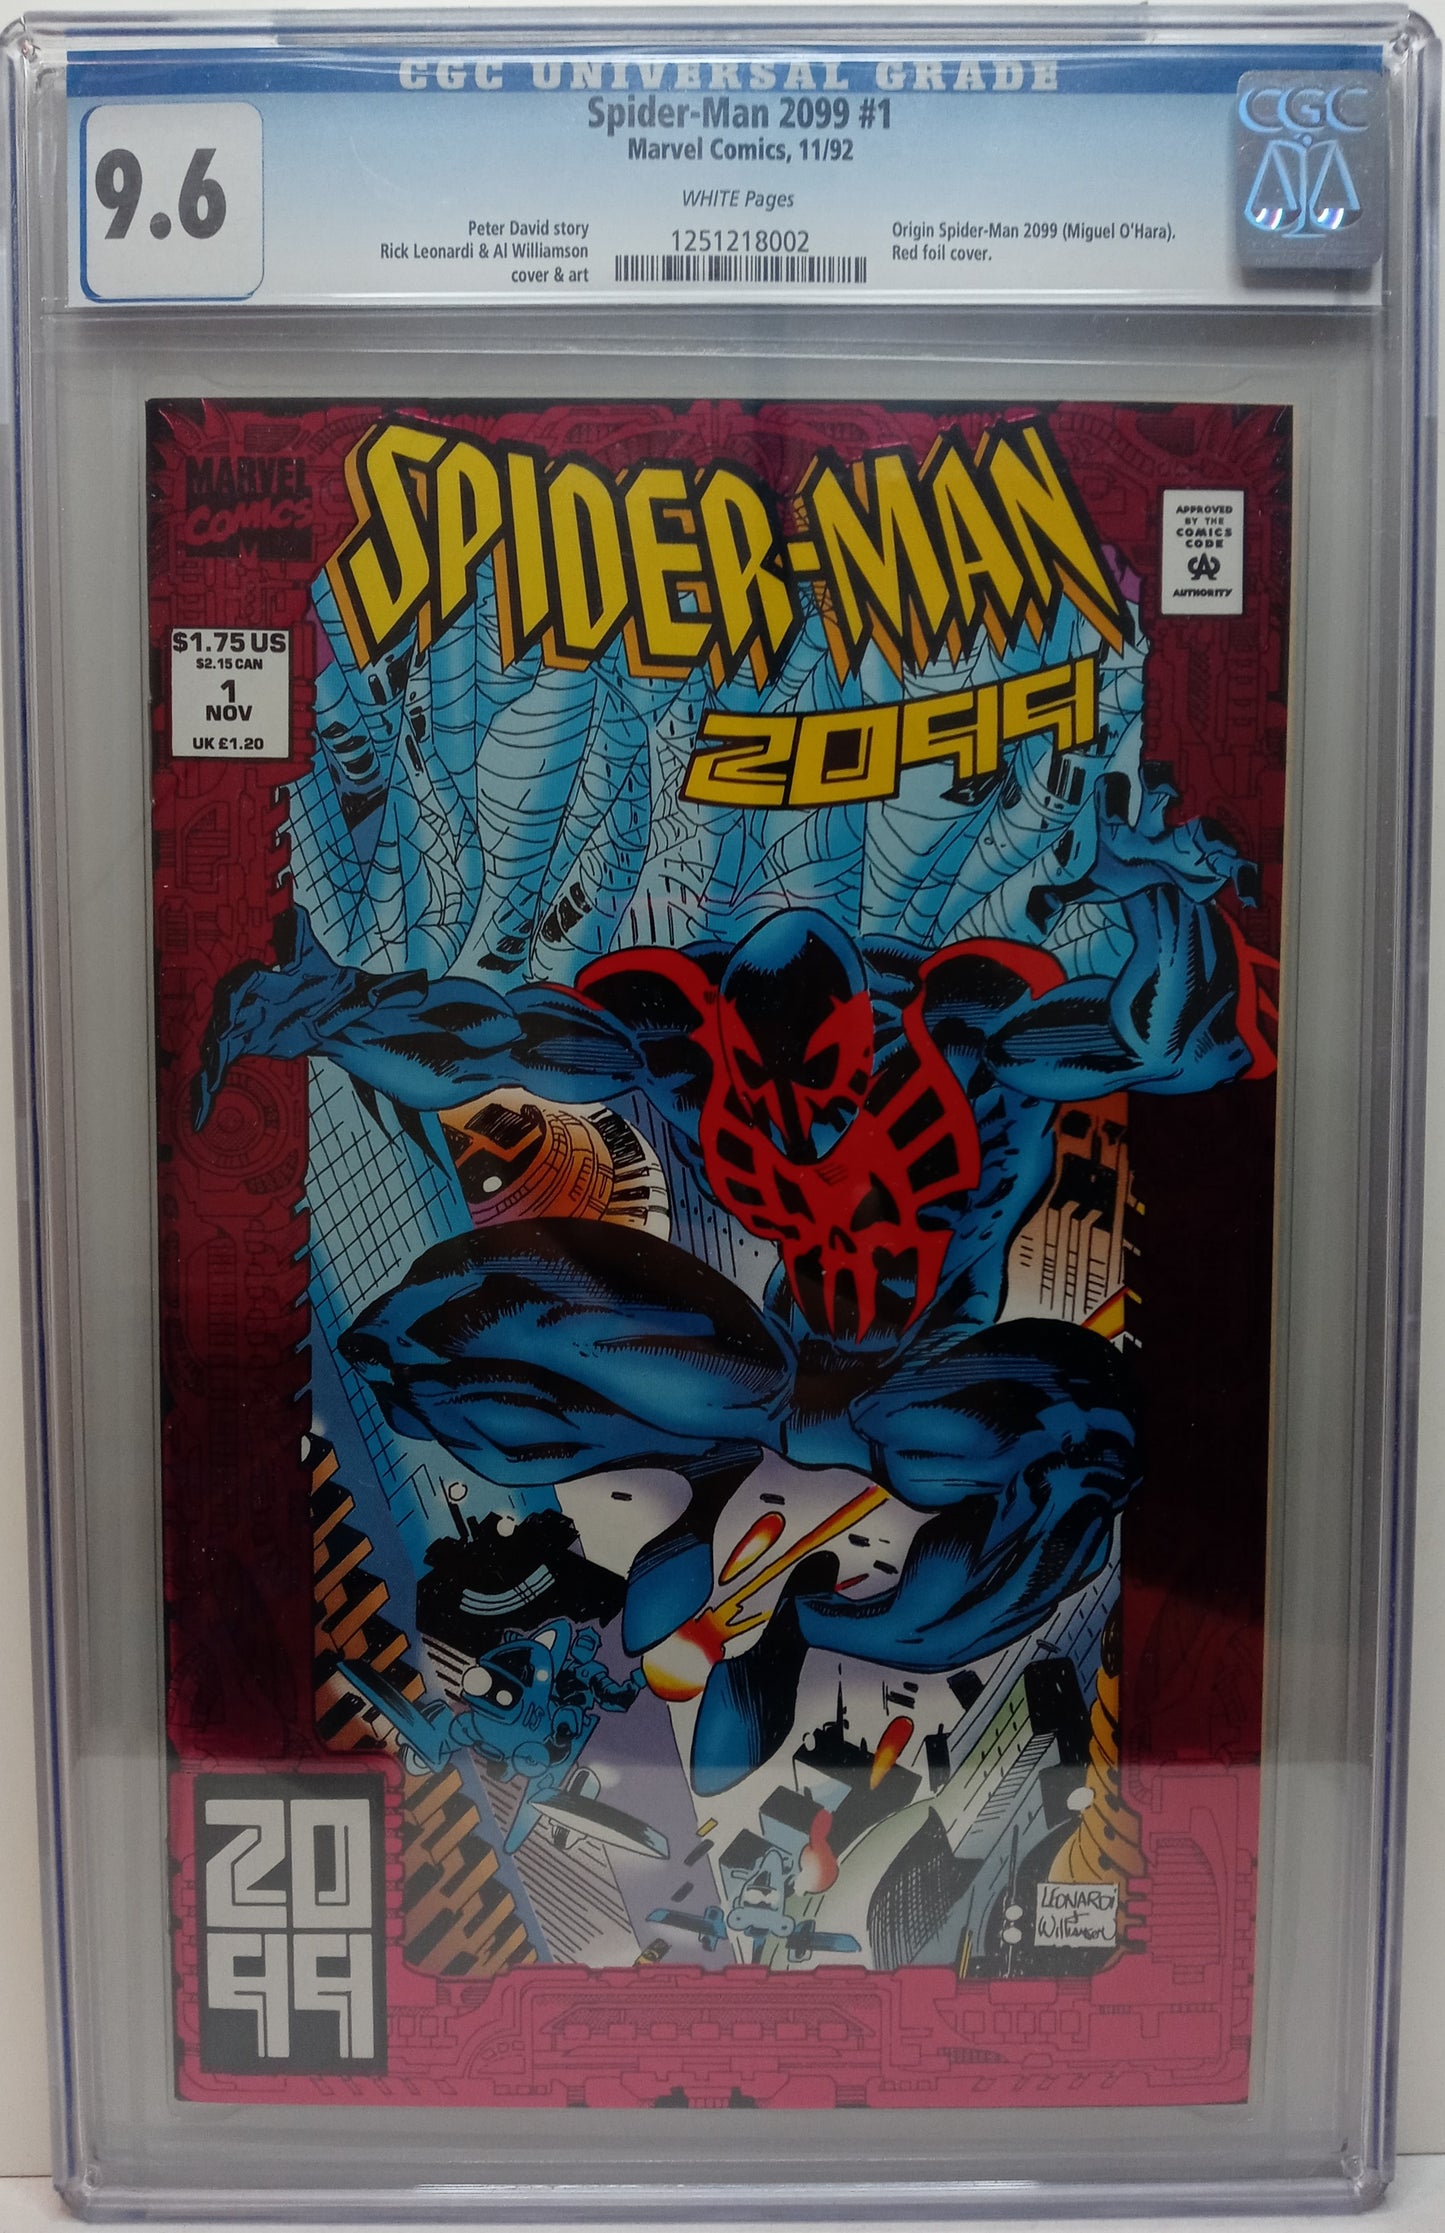 CGC 9.6 Spider-Man 2099 #1 Red Foil Edition [1992]